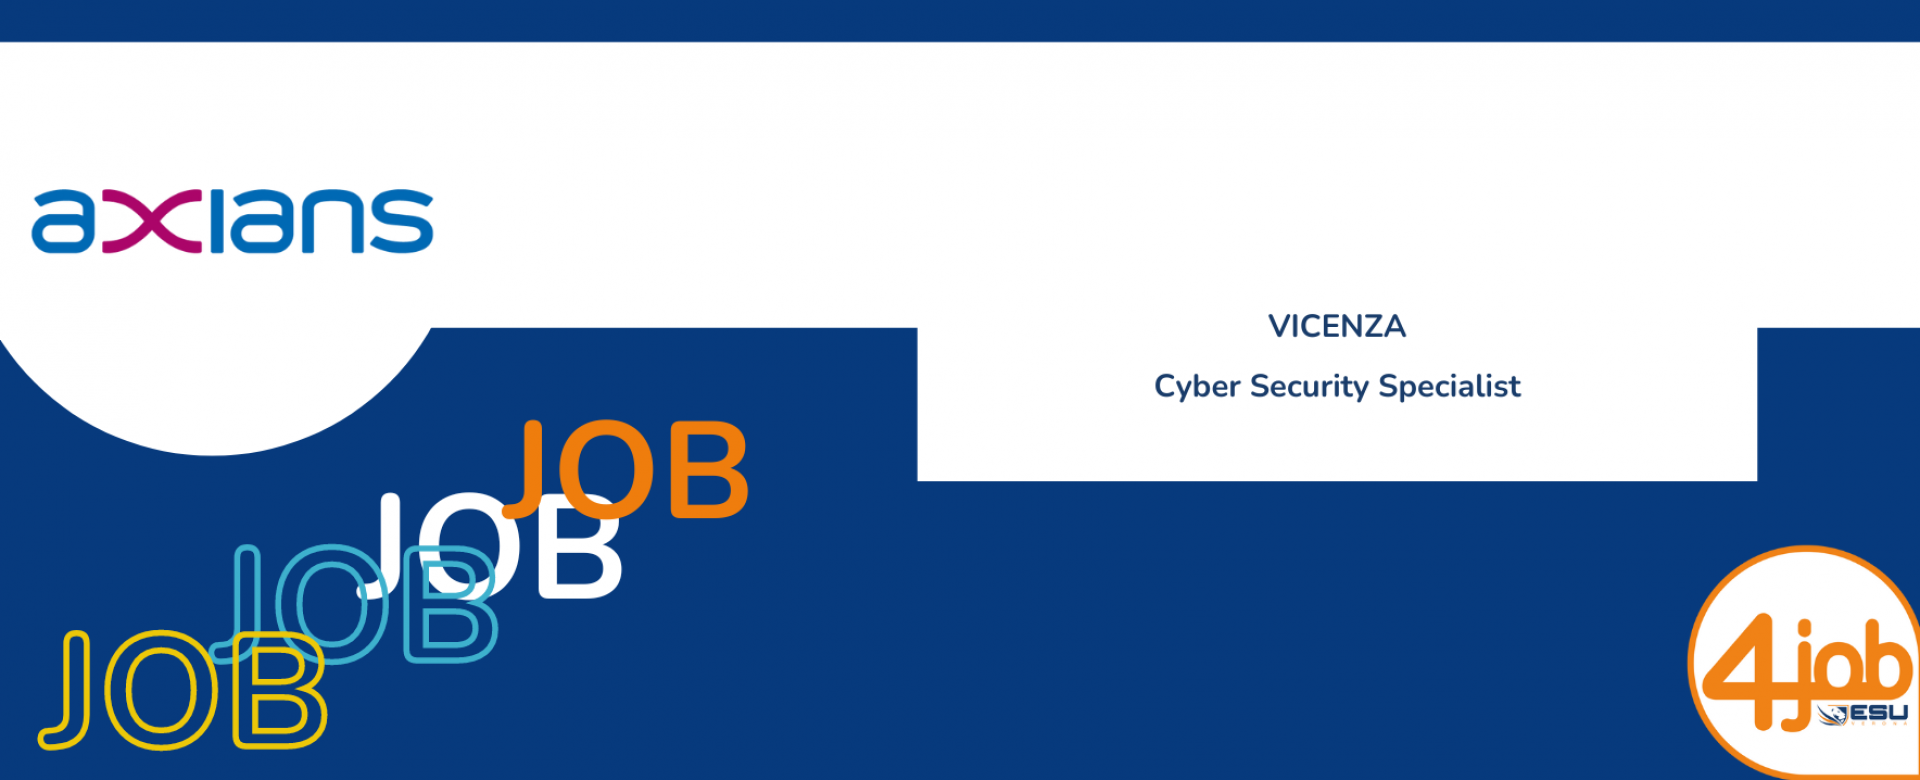 05.05.2023 - Cyber Security Specialist